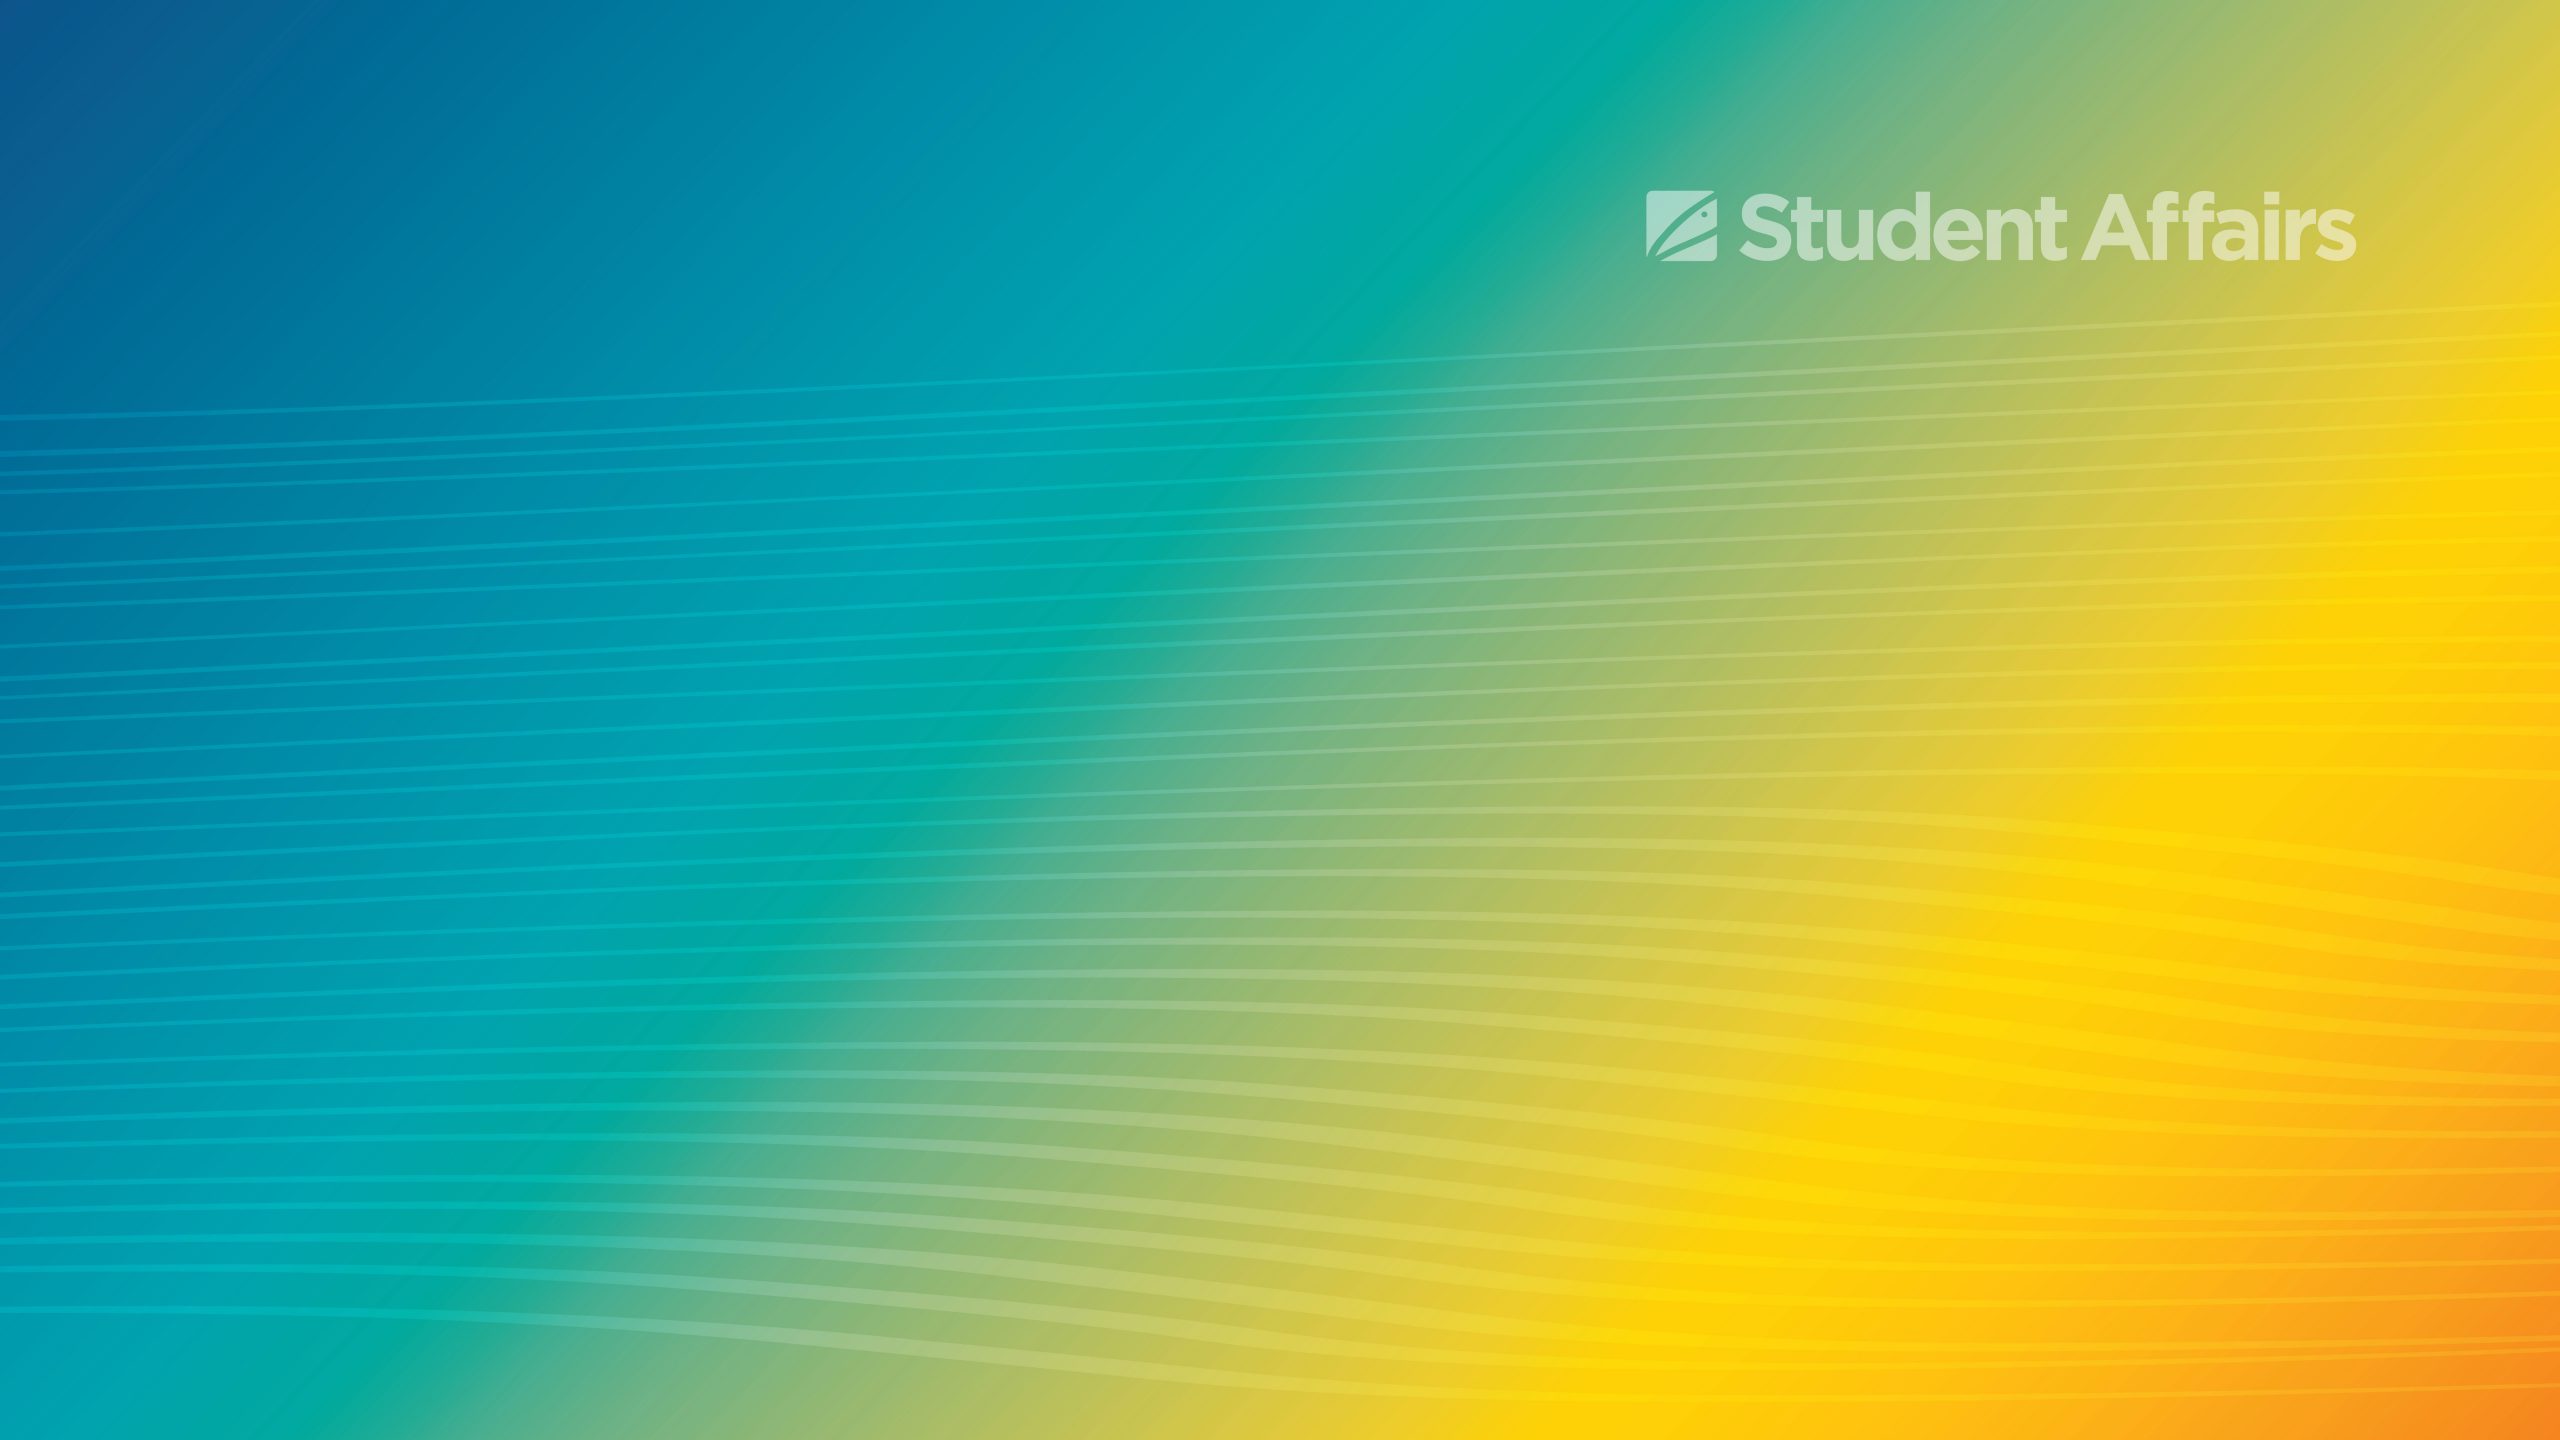 Blue gold gradient with Student Affairs graphic and light white wavy lines in a pattern throughout